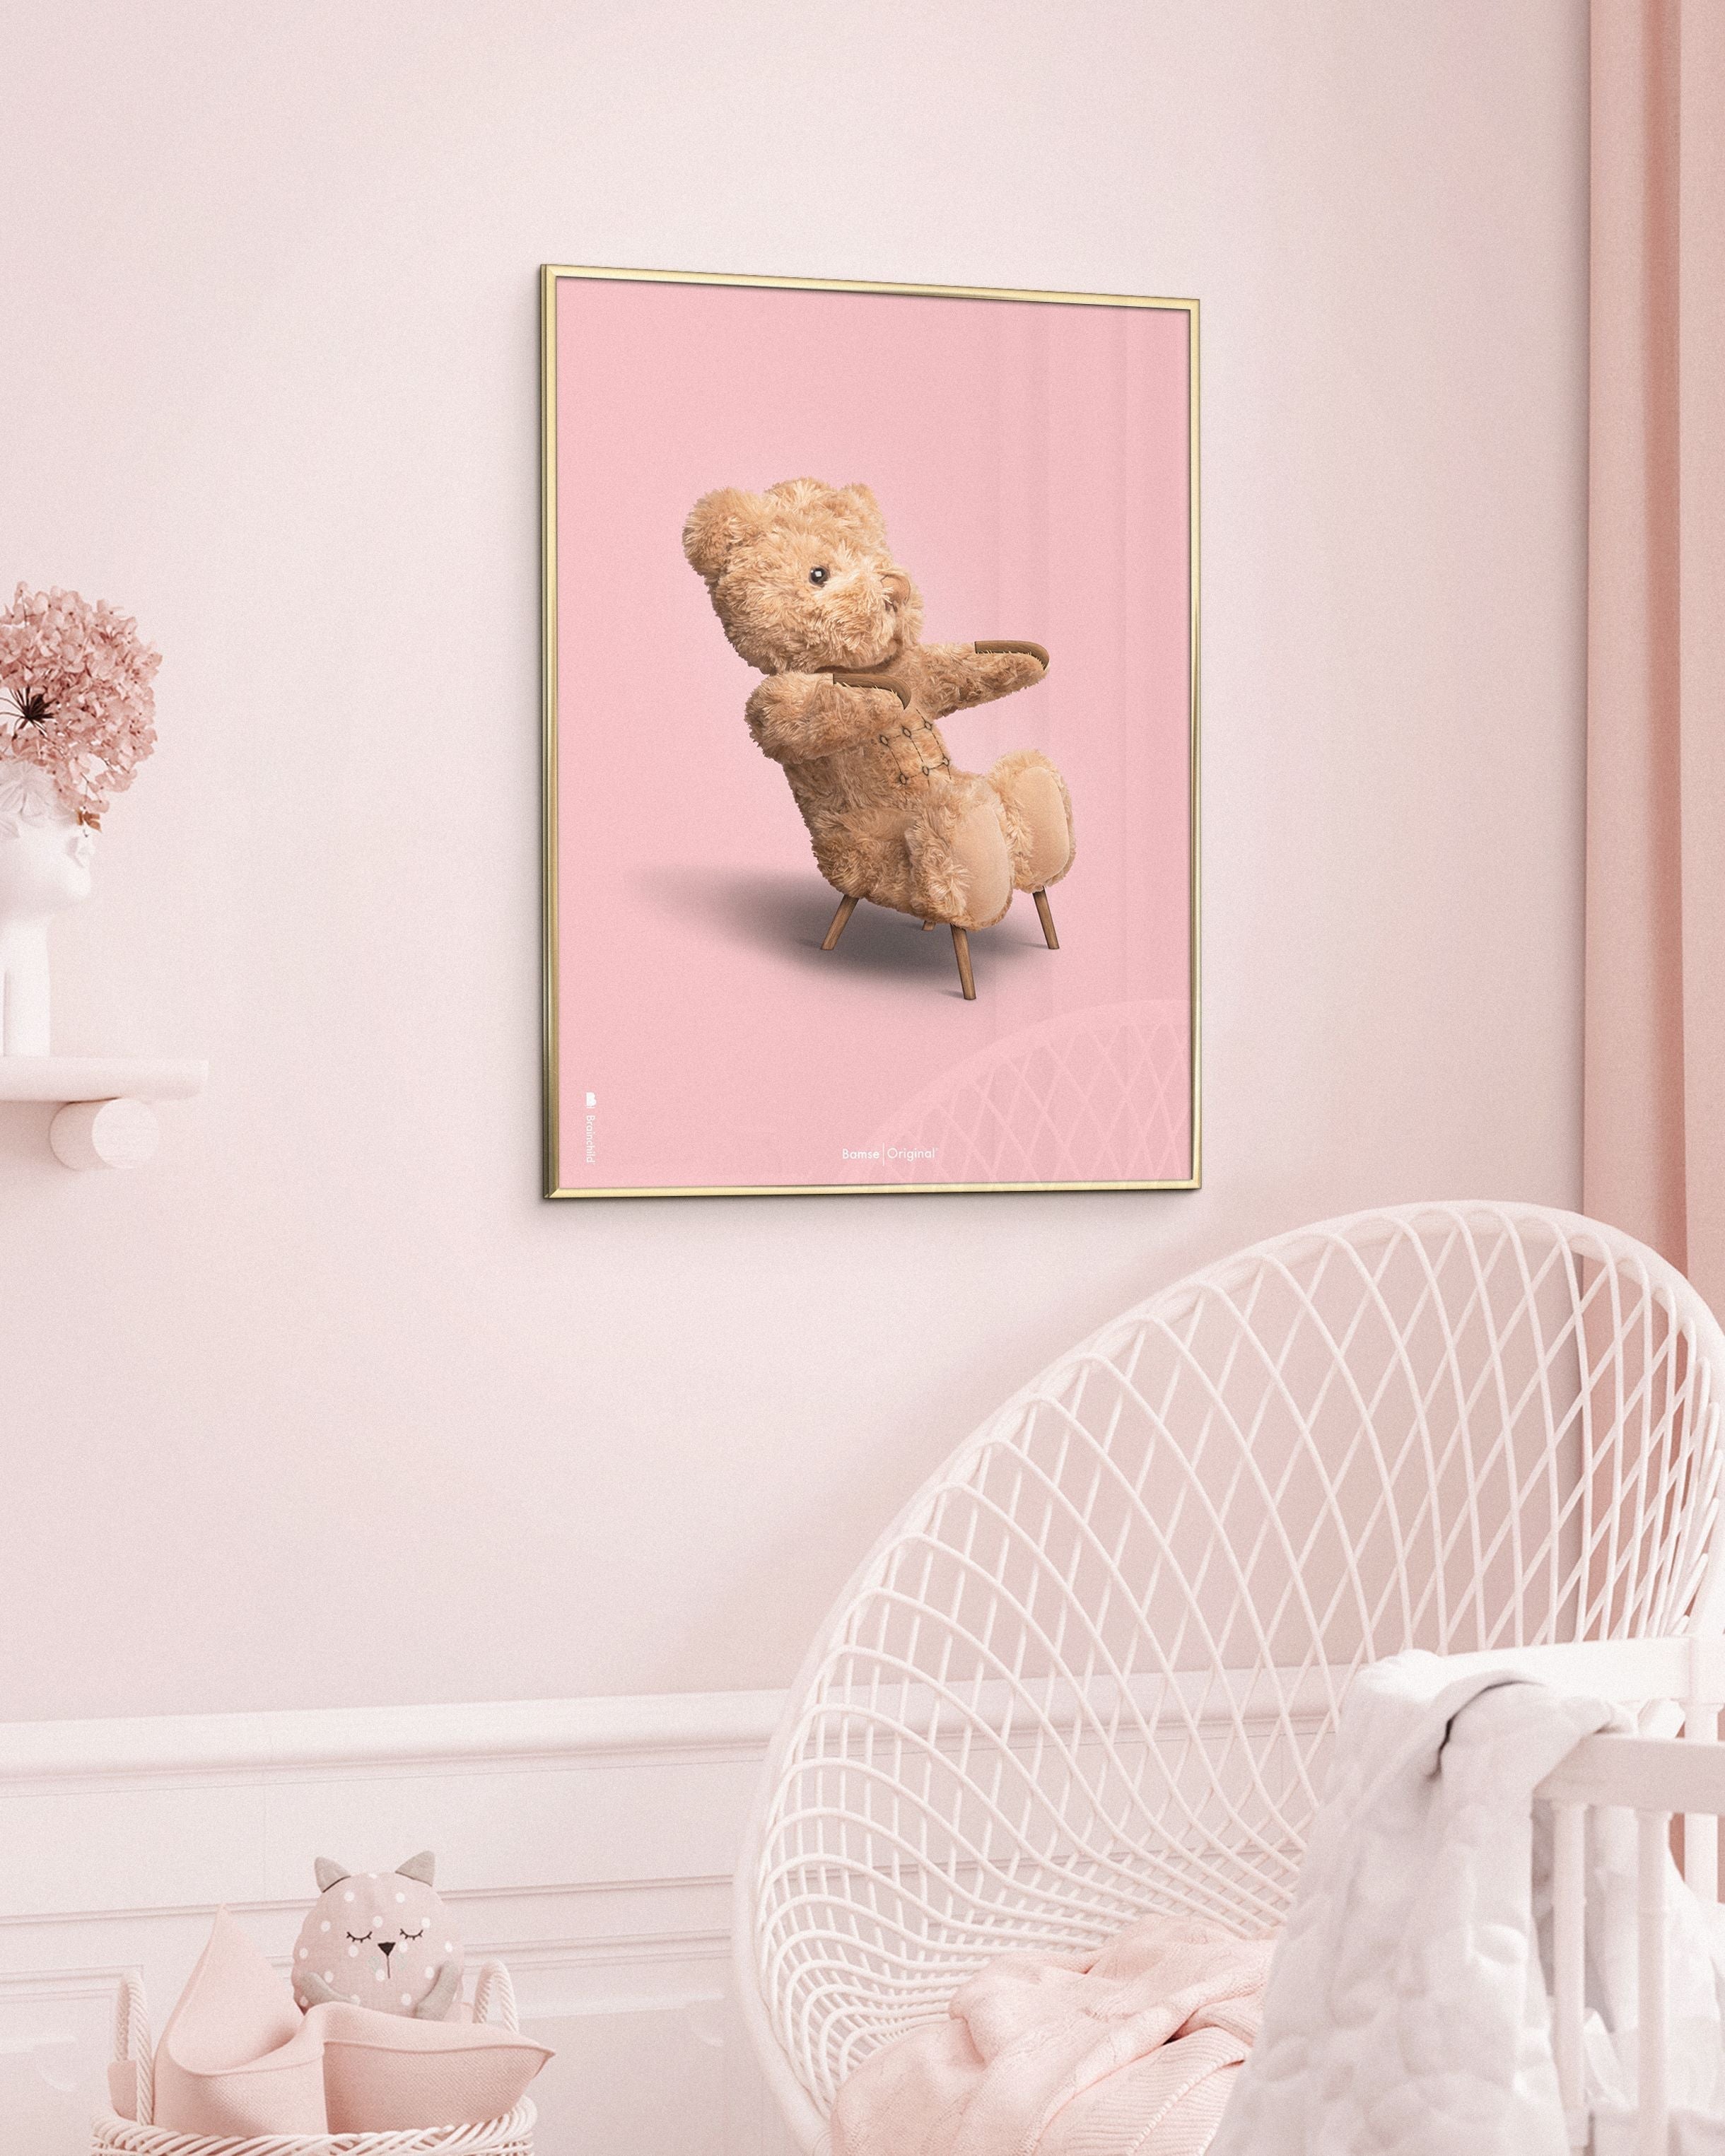 Brainchild Teddy Bear Classic Poster Brass Colored Frame 30x40 Cm, Pink Background